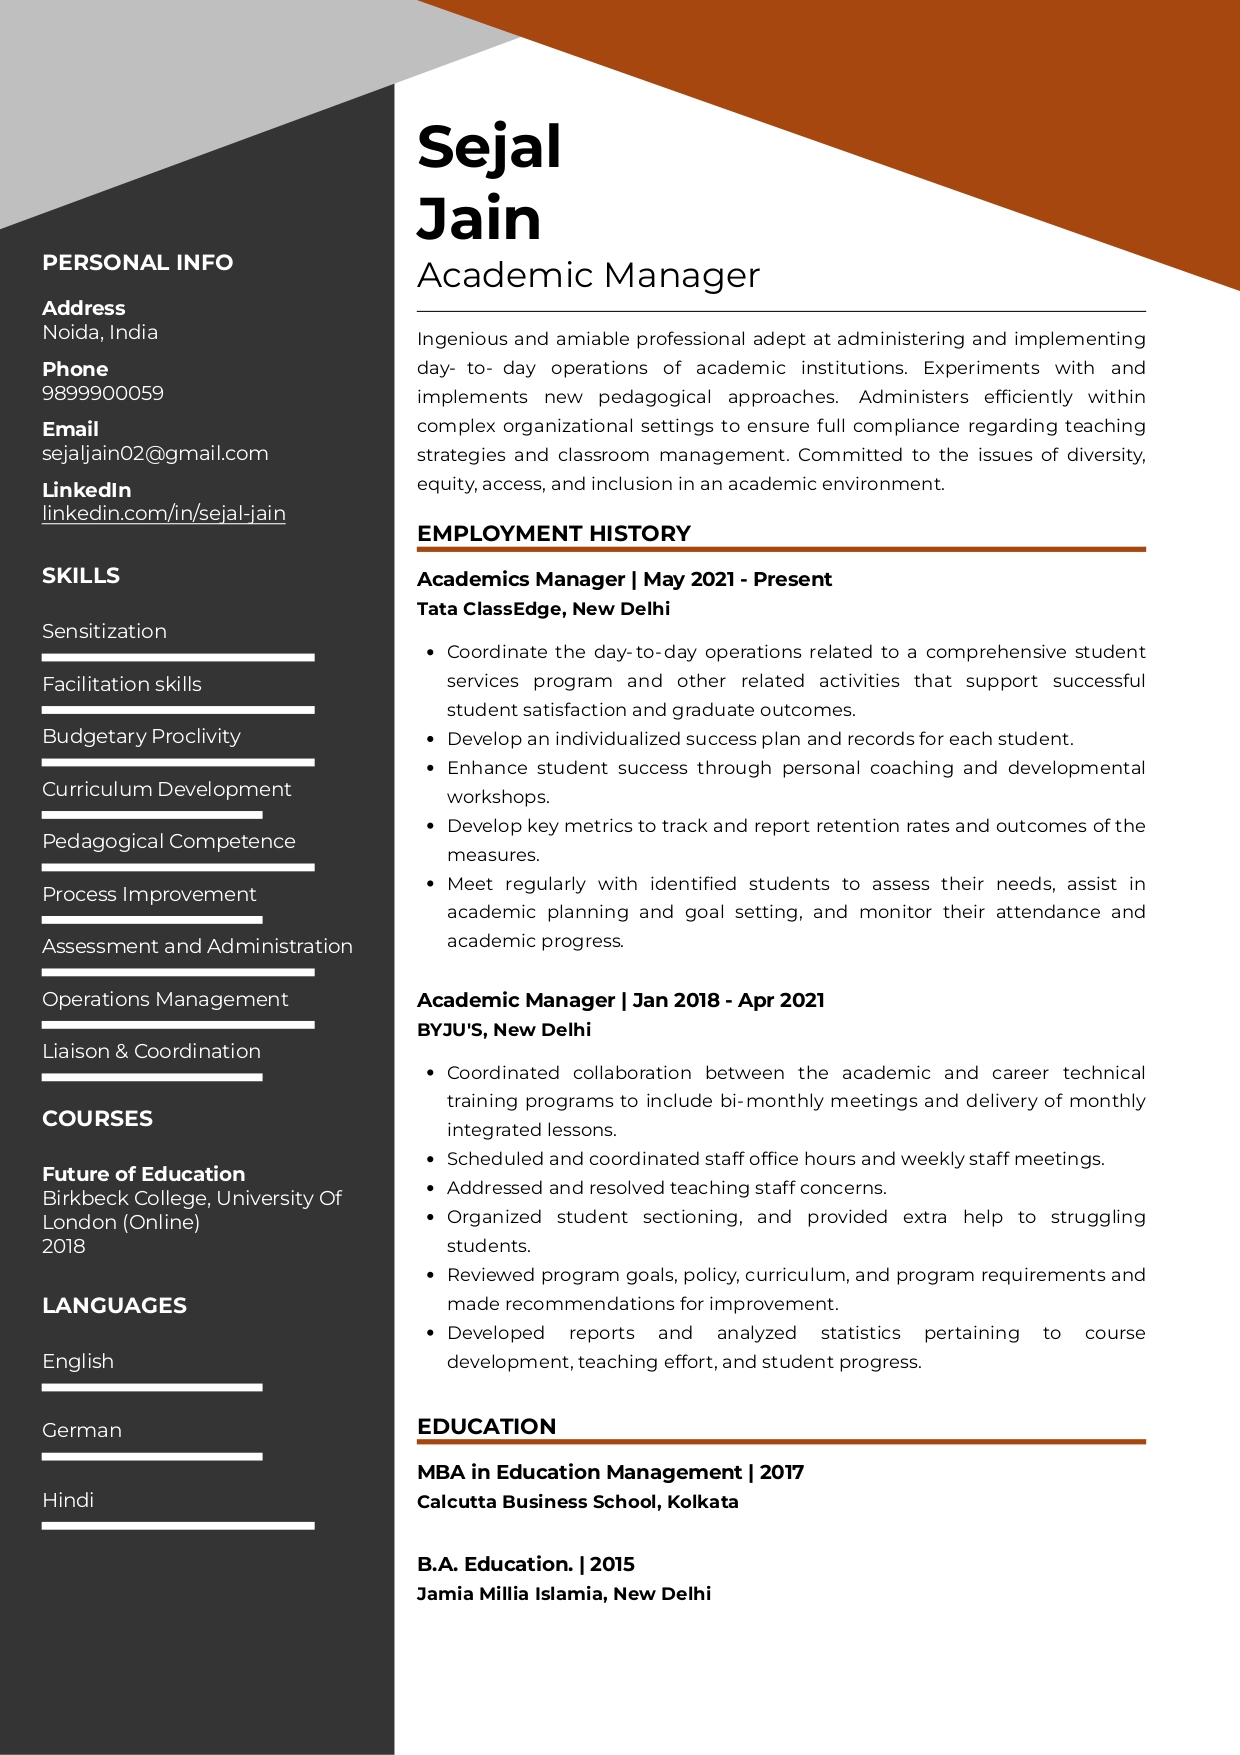 Sample Resume of Academic Manager | Free Resume Templates & Samples on Resumod.co